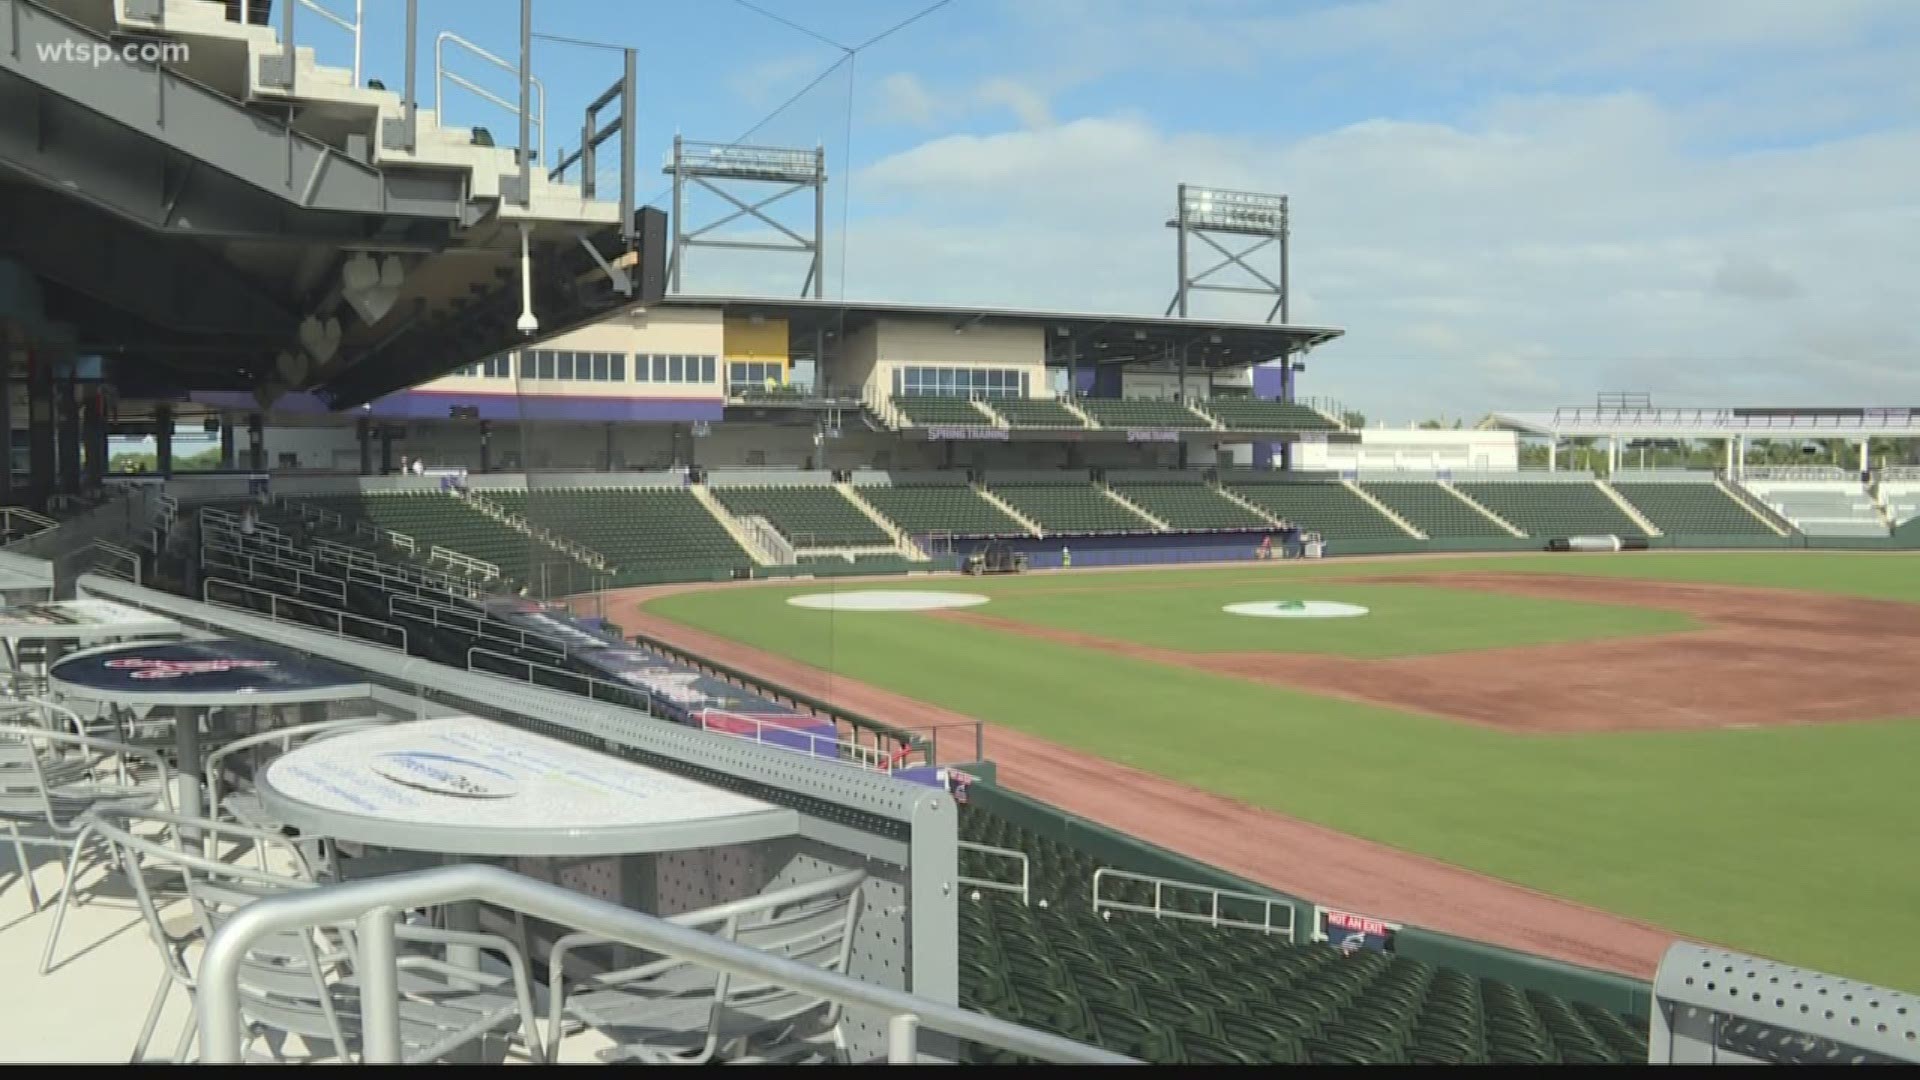 "Cool Today Park" is a $125 million, state-of-the-art spring training complex and it will be open for business this weekend as the Braves take on the Rays.